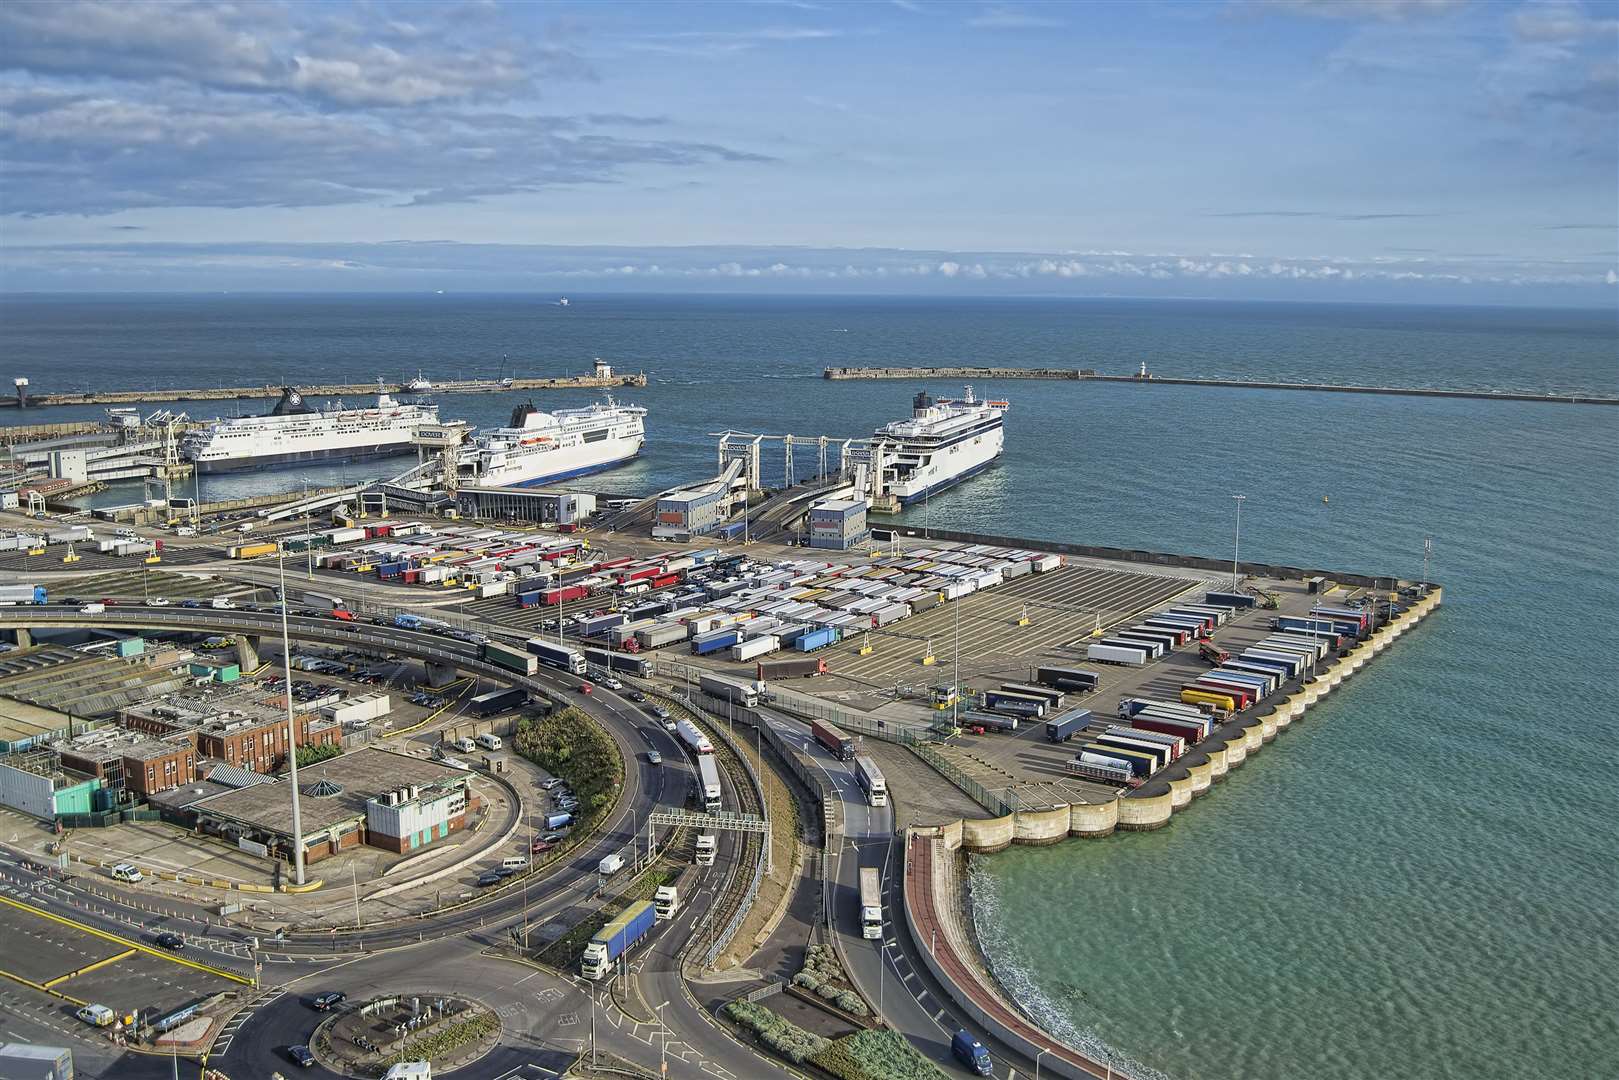 The proximity to the Port of Dover was a key reason behind the £3.5m purchase of the site in Lympne